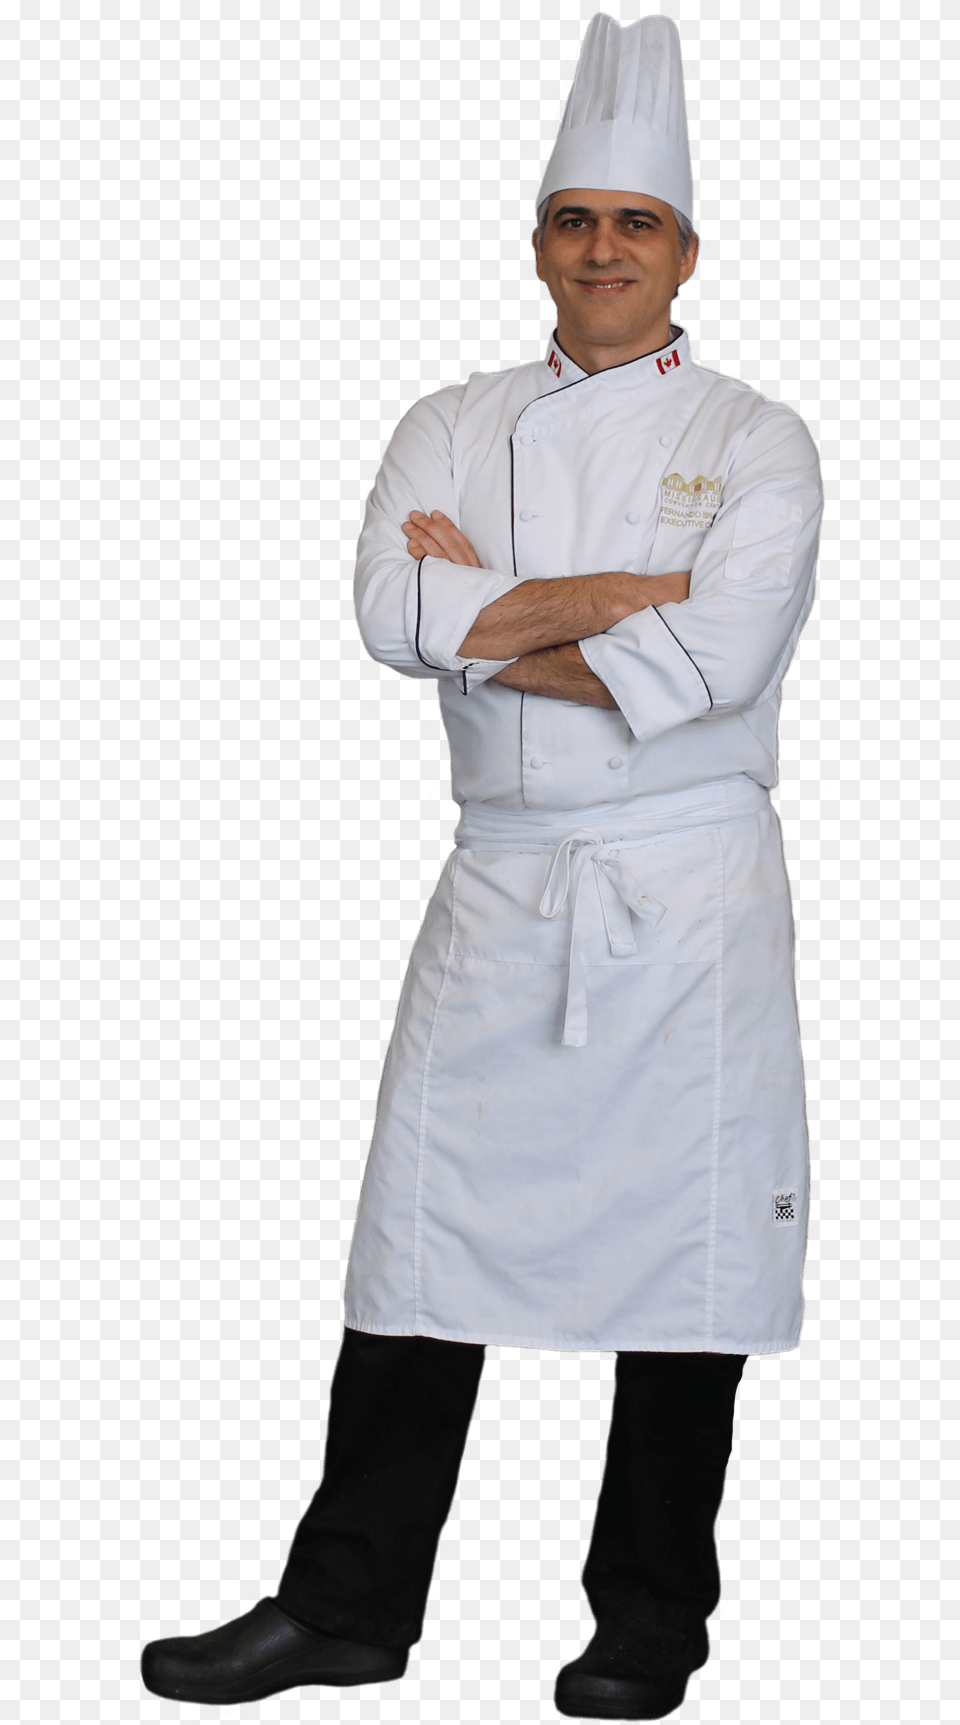 Chef Chef, Clothing, Coat, Adult, Person Png